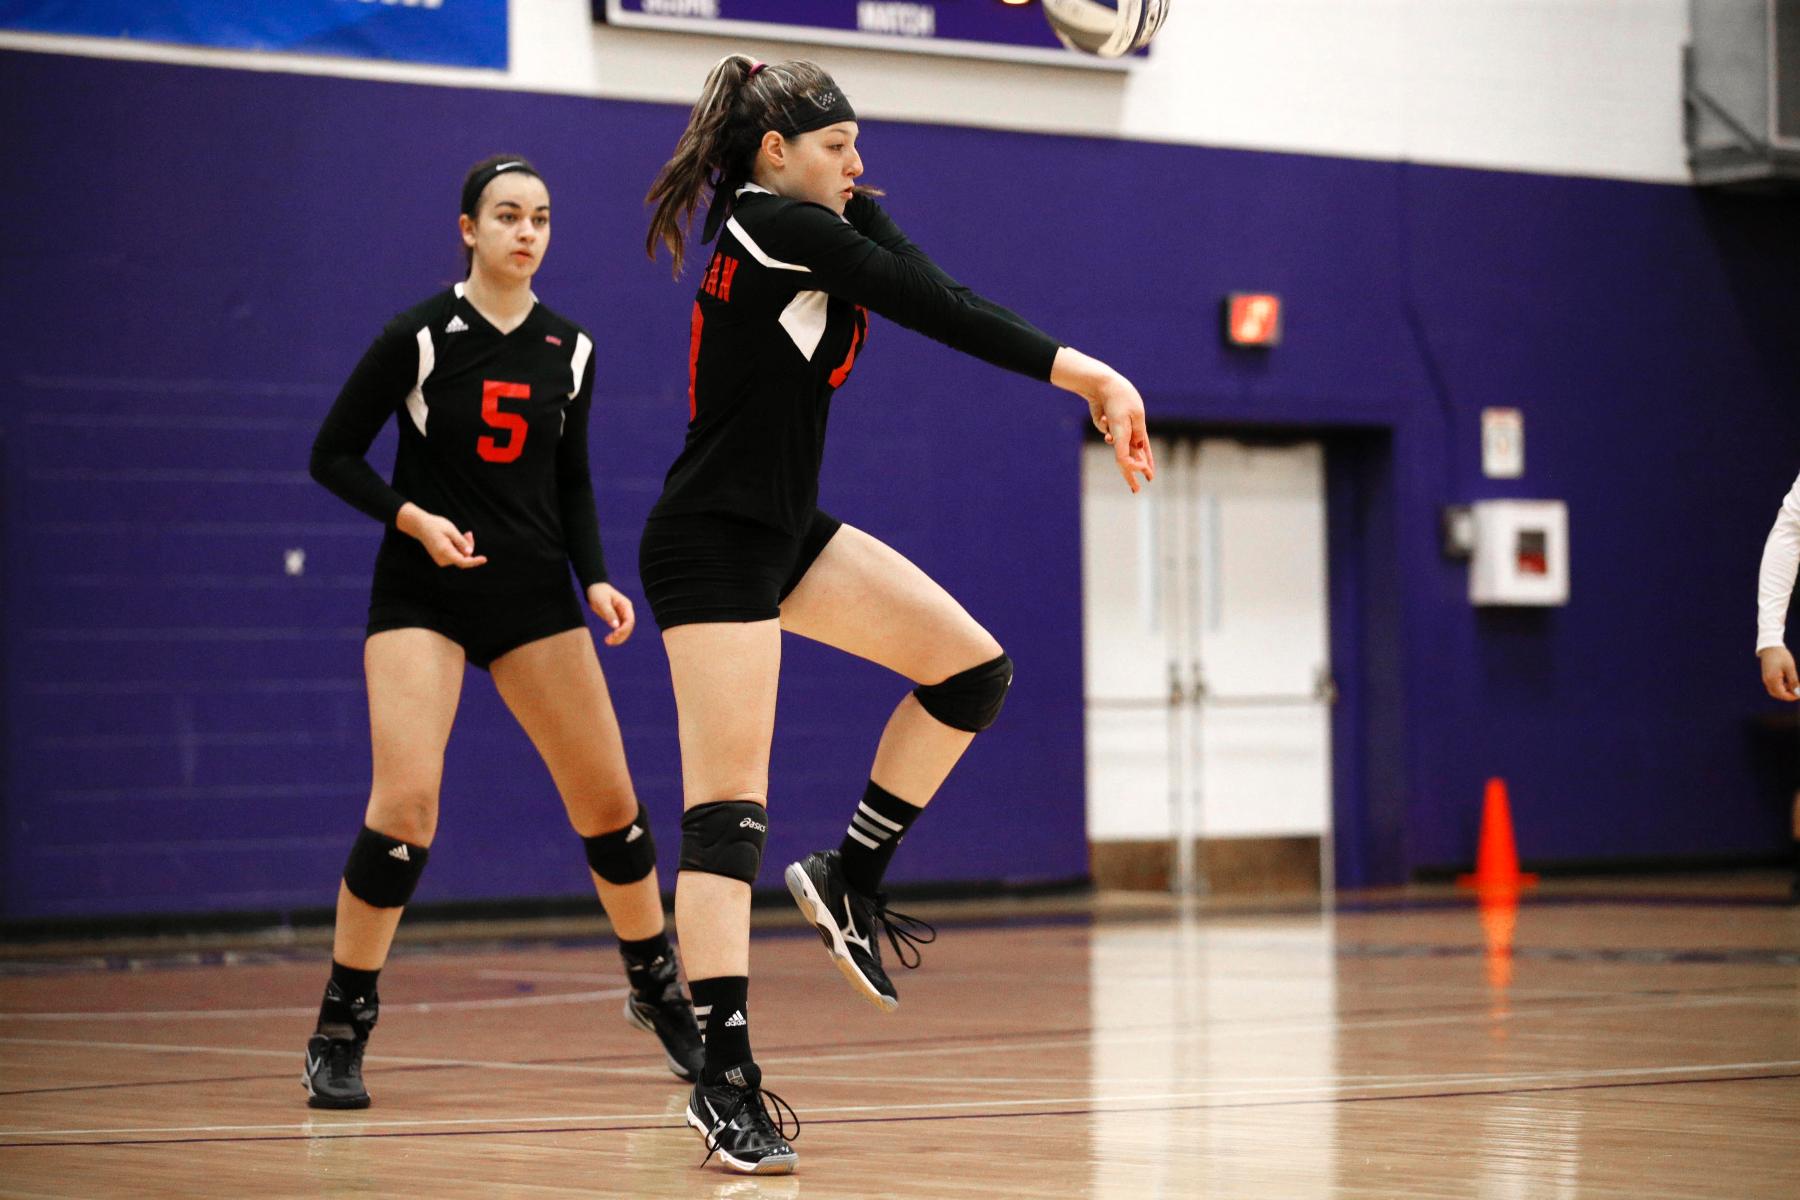 WOMEN'S VOLLEYBALL LOSES AT POST UNIVERSITY